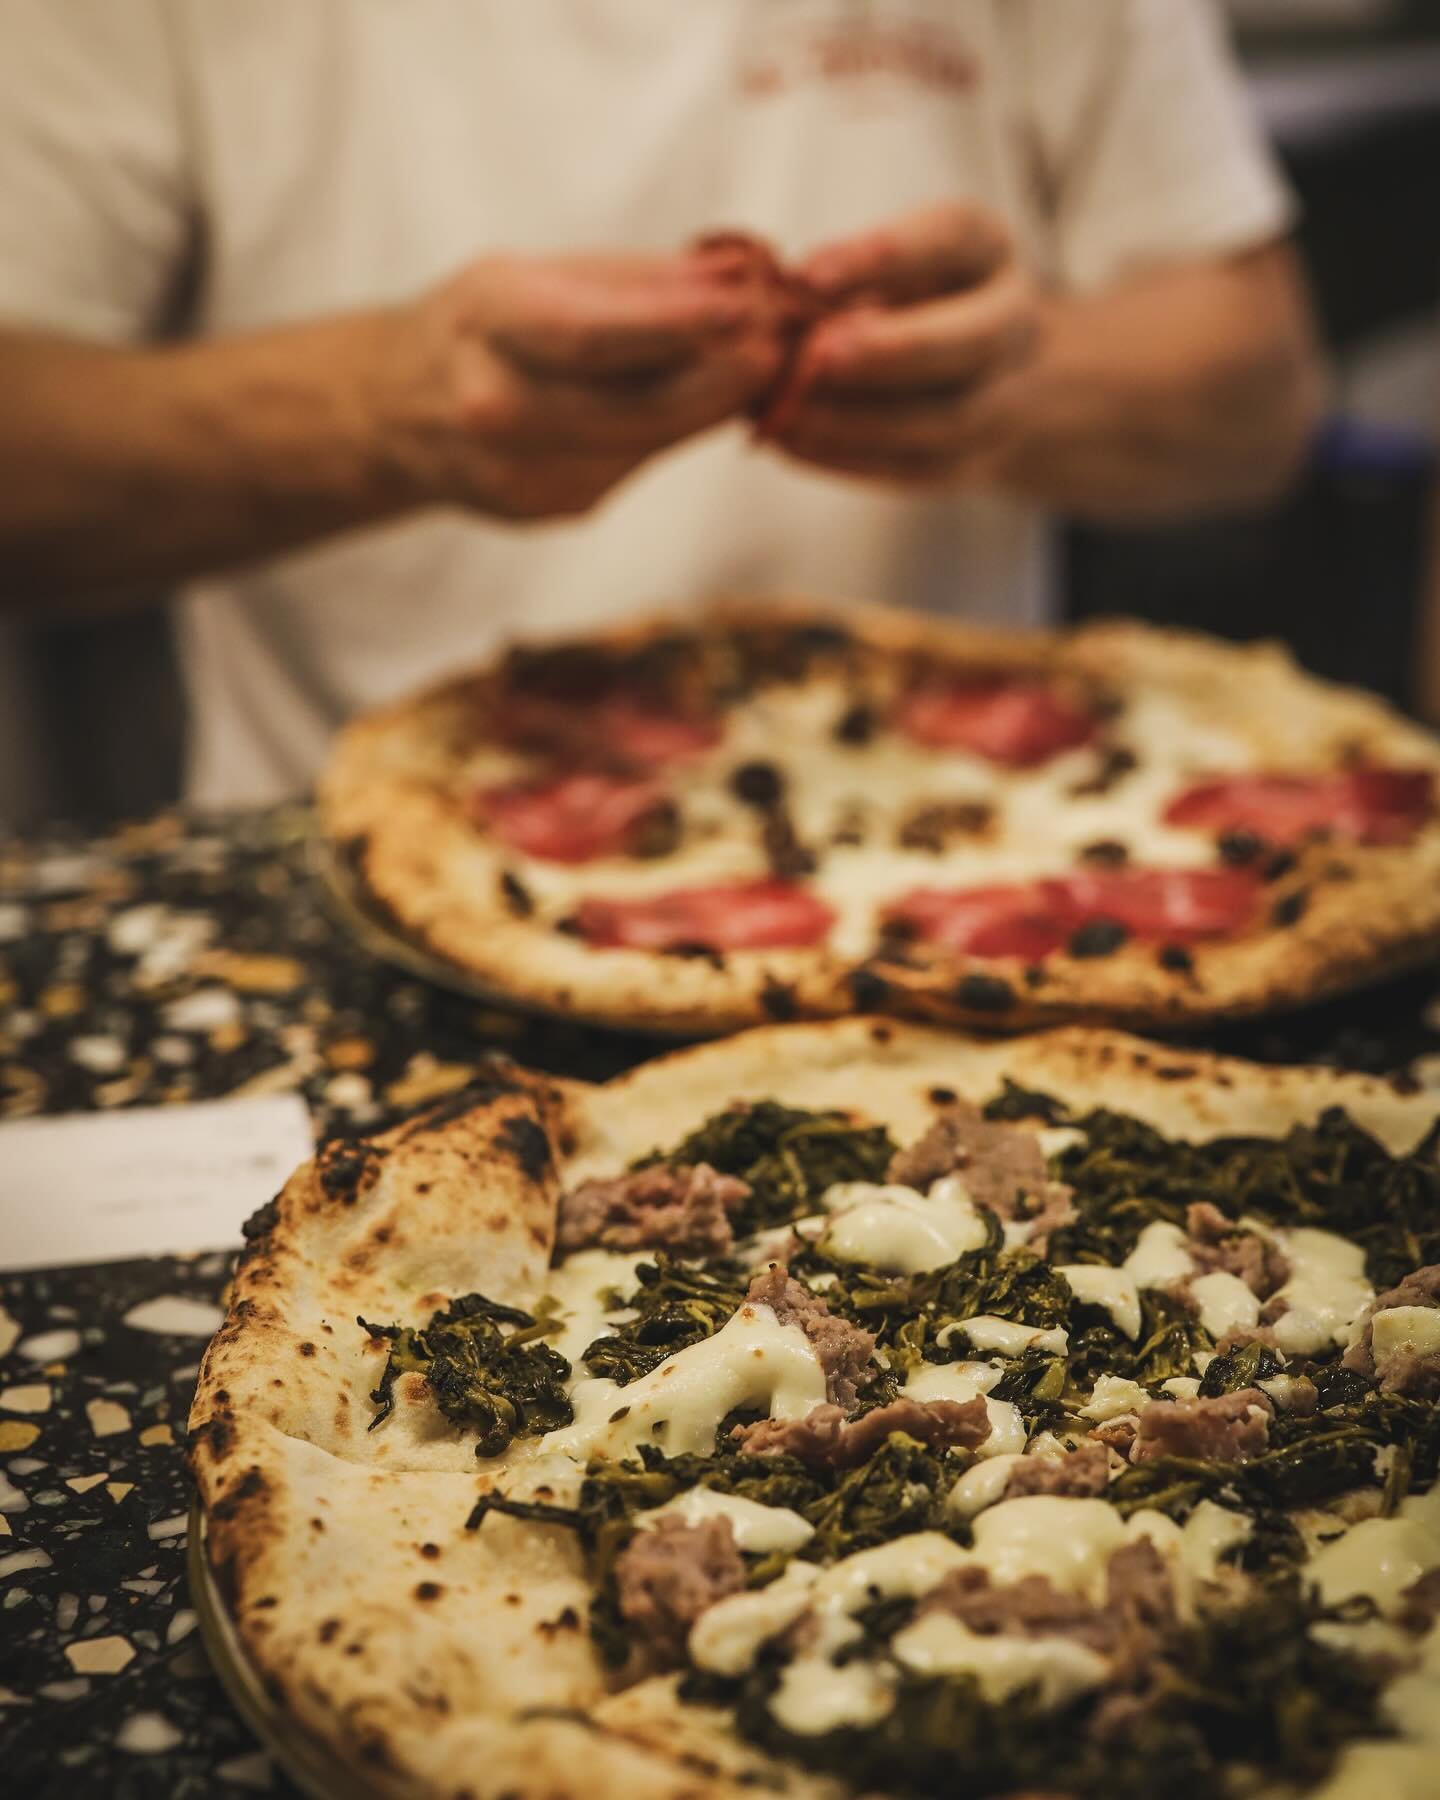 🍕 FRIARIELLI &amp; SALSICCIA PIZZA 🍕

🧀 Dive into the heart of Naples with our latest mouthwatering creation. We&rsquo;ve flown in Agerola Fior di Latte directly from the lush hills of Campania to ensure a milky, smooth texture unlike any other.

